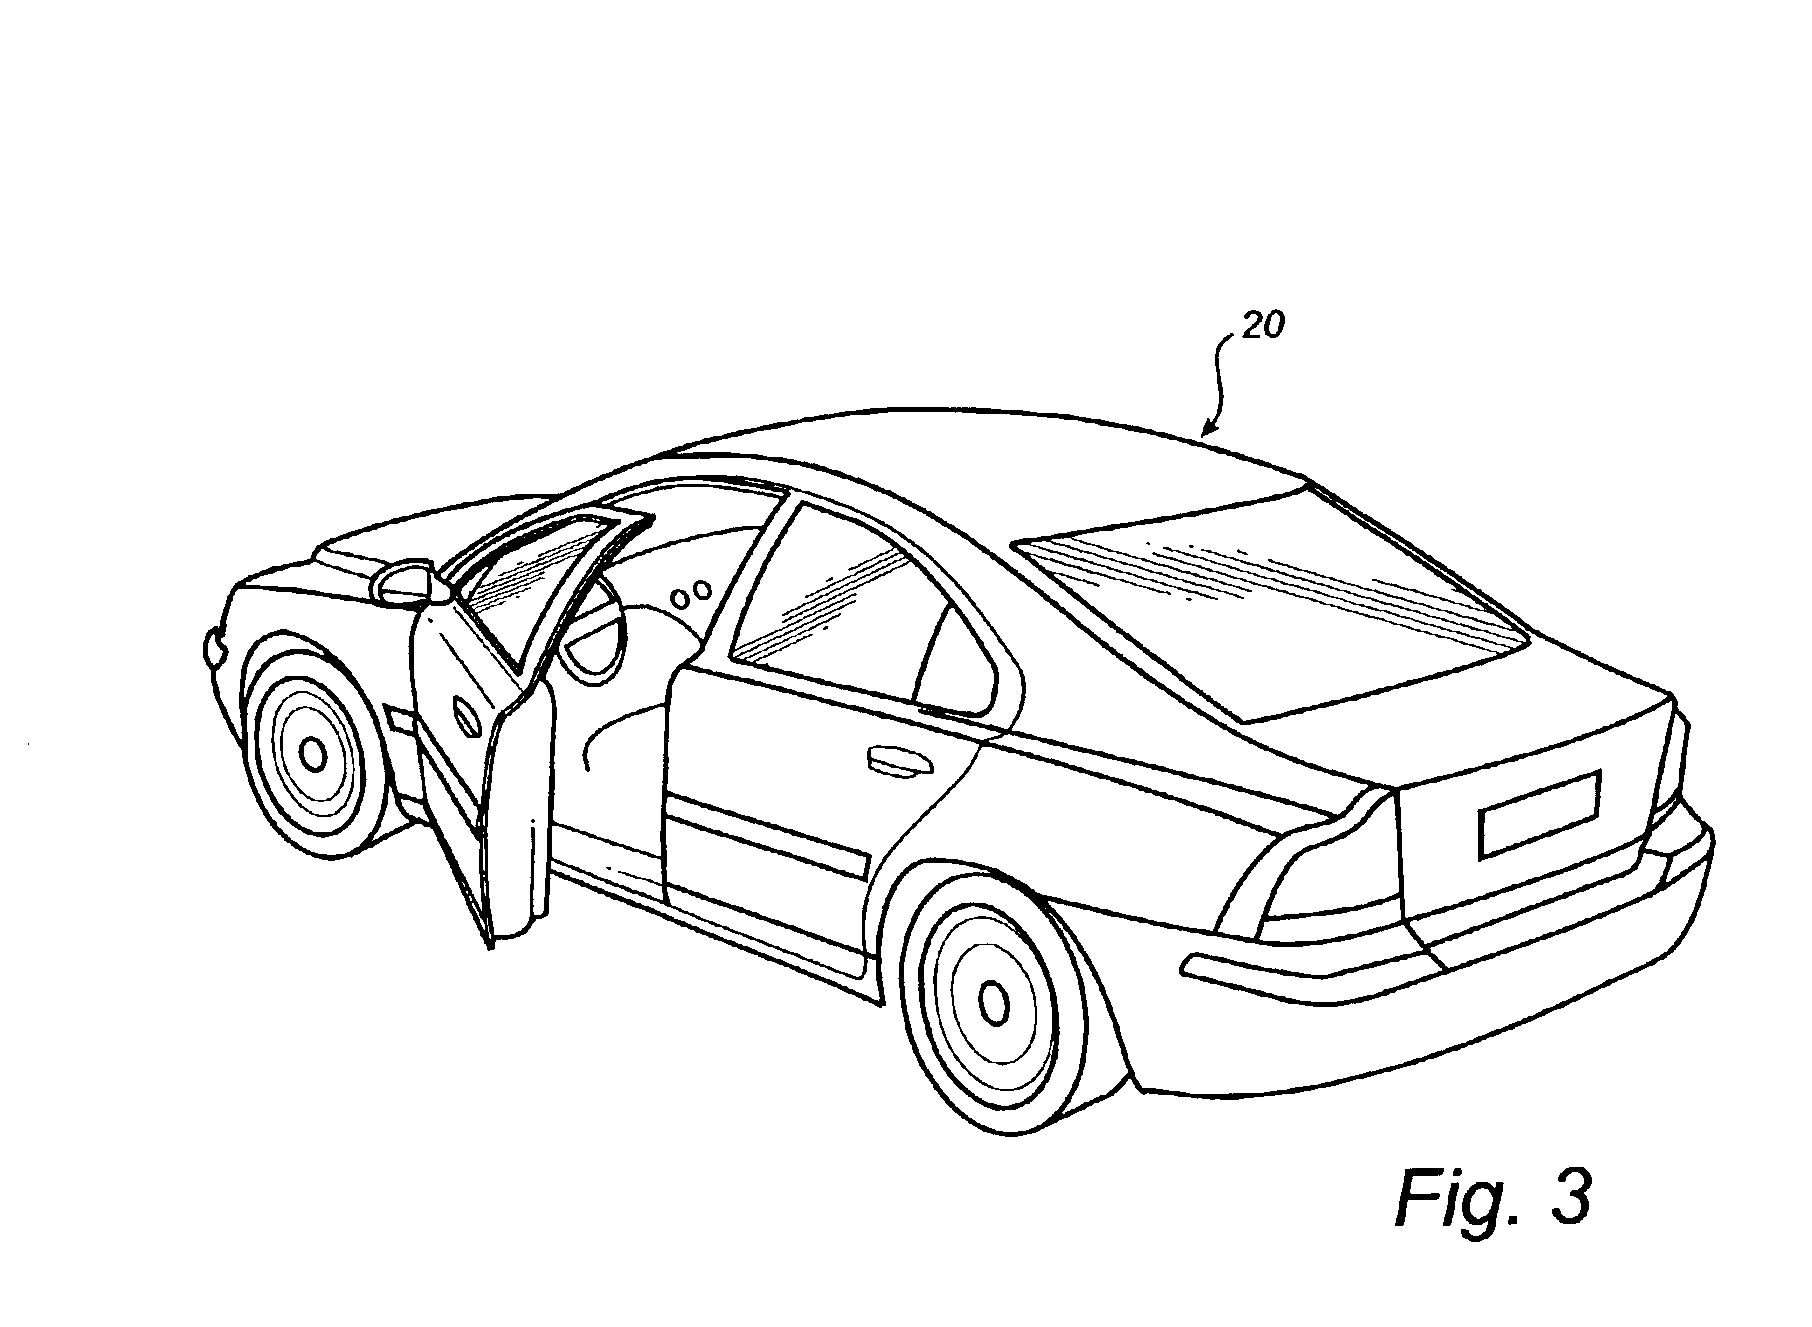 System and method for controlling an object detection system of a vehicle